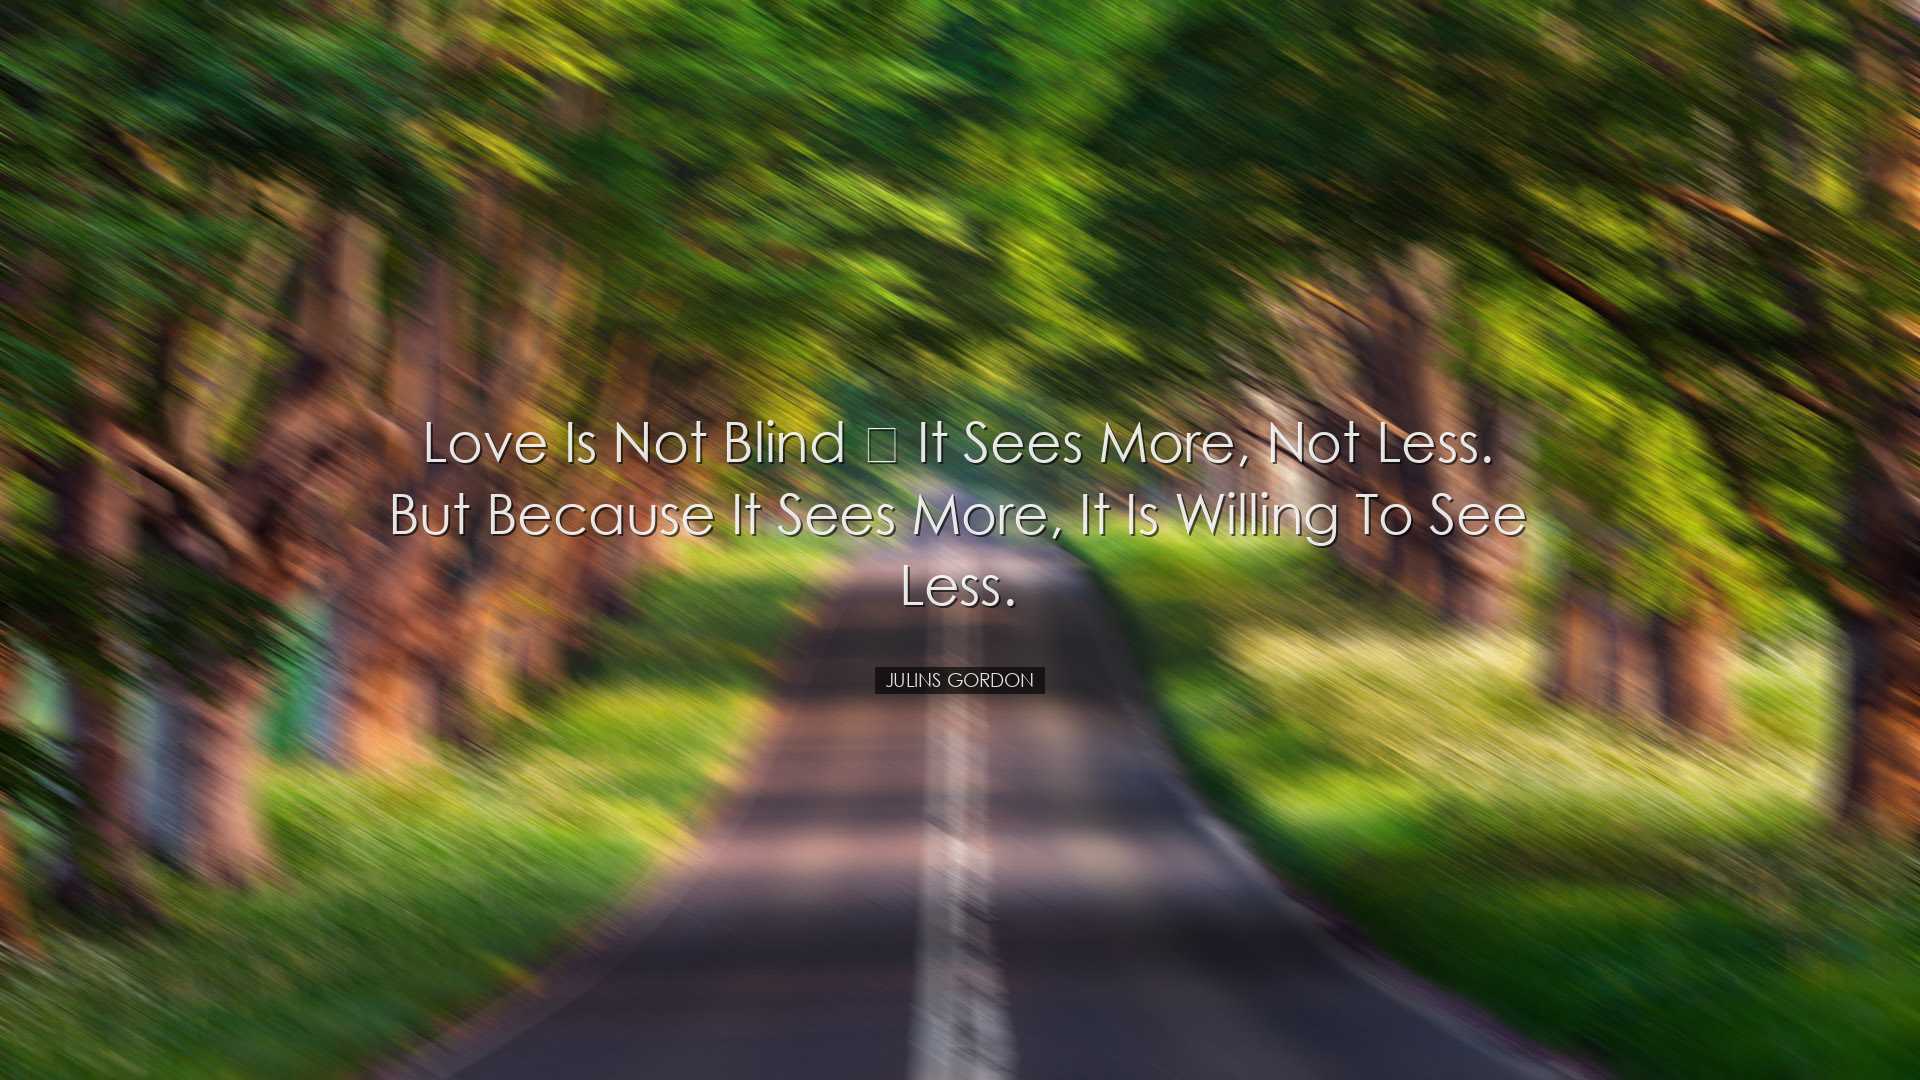 Love is not blind — it sees more, not less. But because it sees